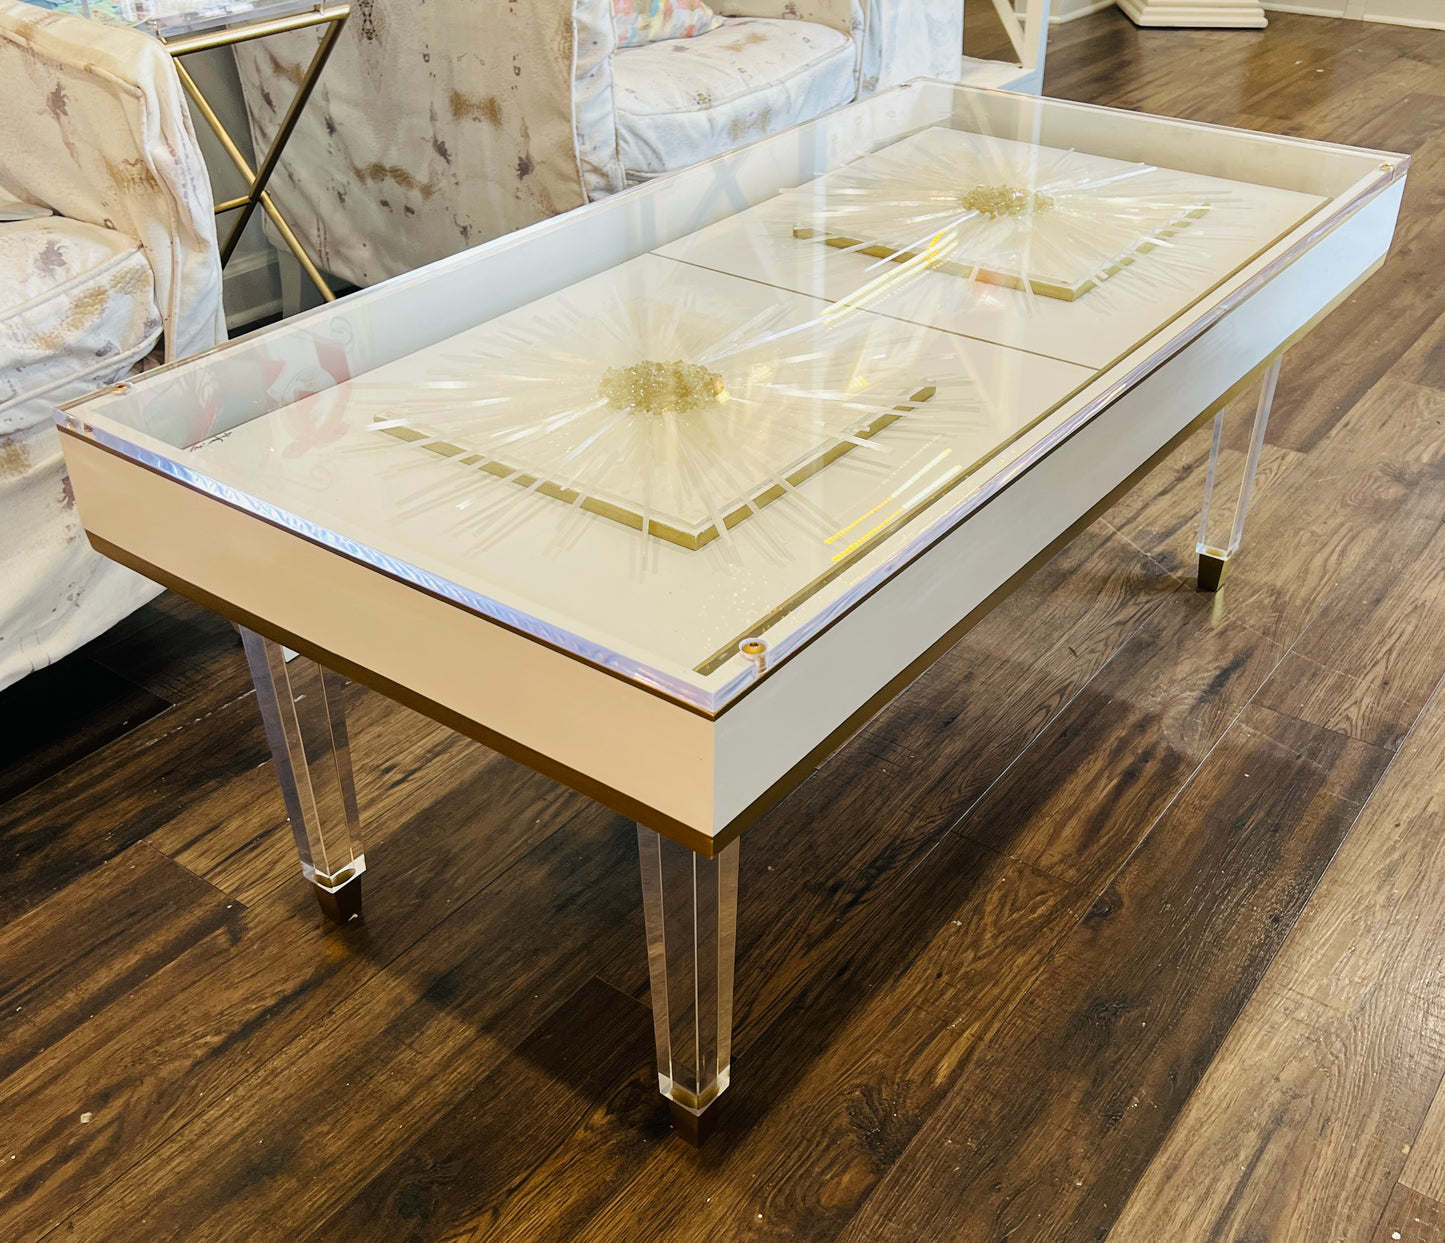 Double Starburst Lucite Coffee Table